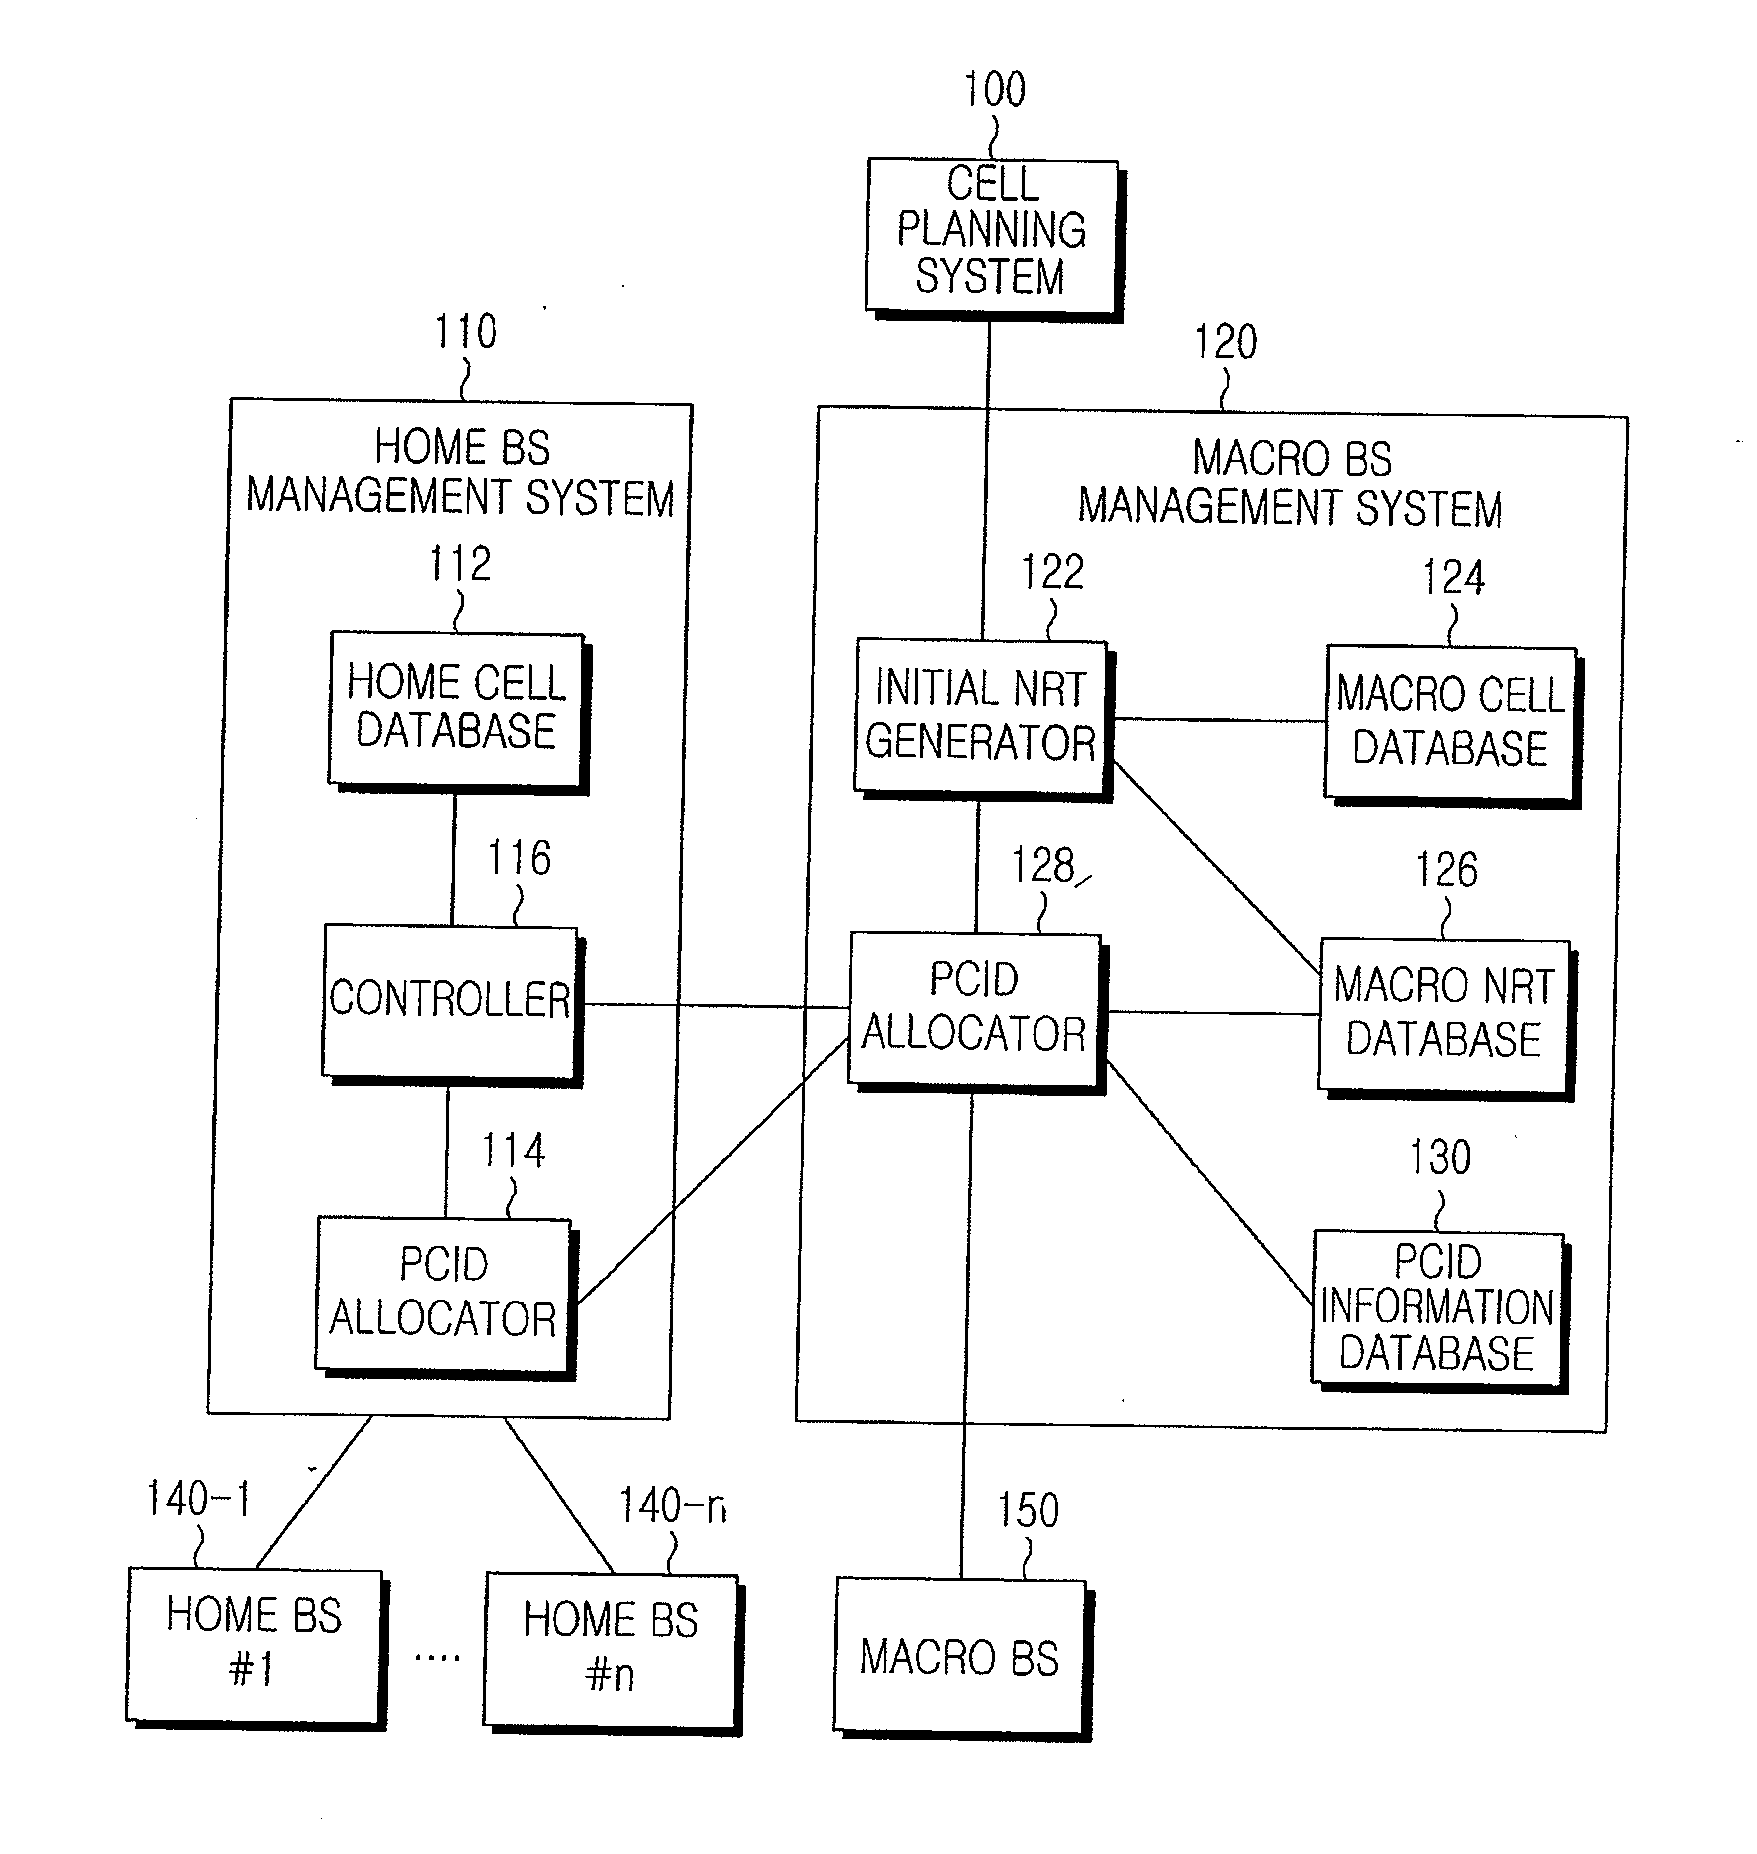 Method and system for operating cells in an overlay network including macro cells and home cells